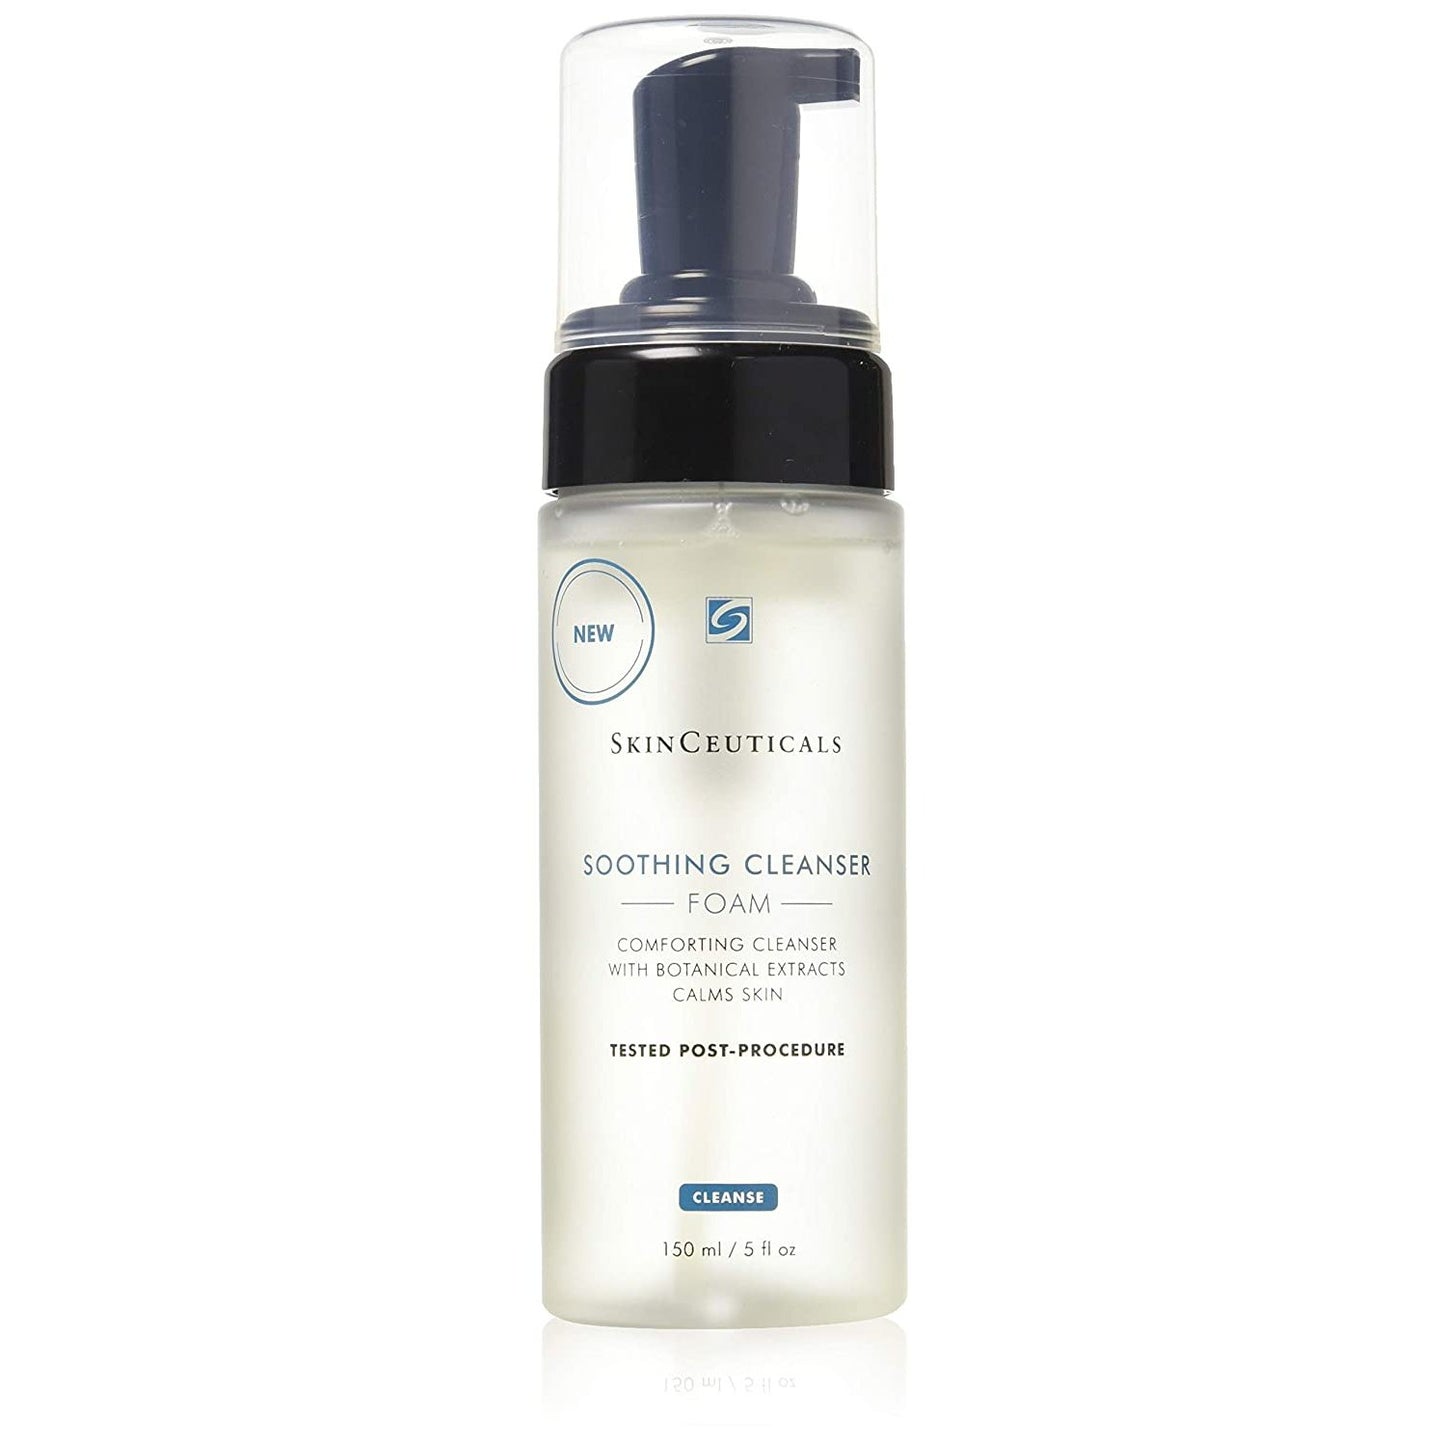 Skinceuticals Cleans Soothing Cleanser Foam 5 oz